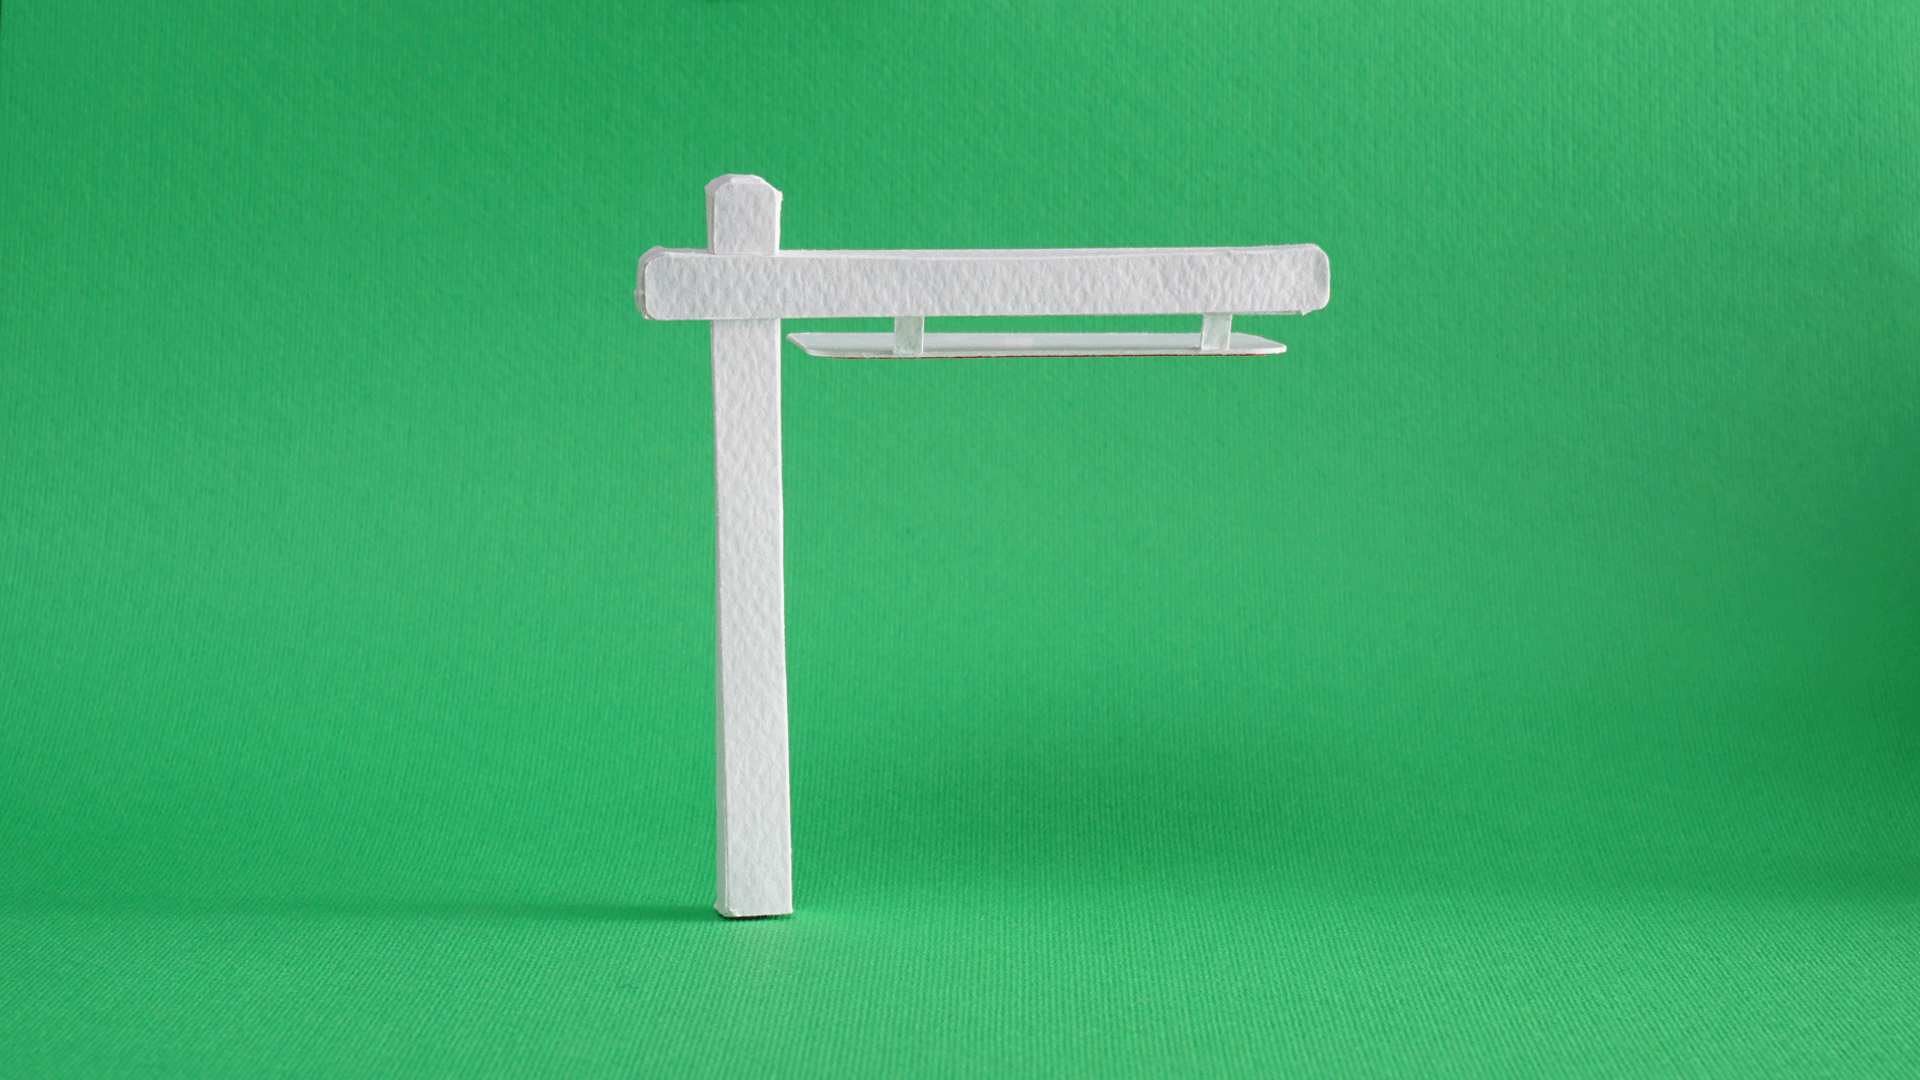 stopmotion animation for sale paper sign